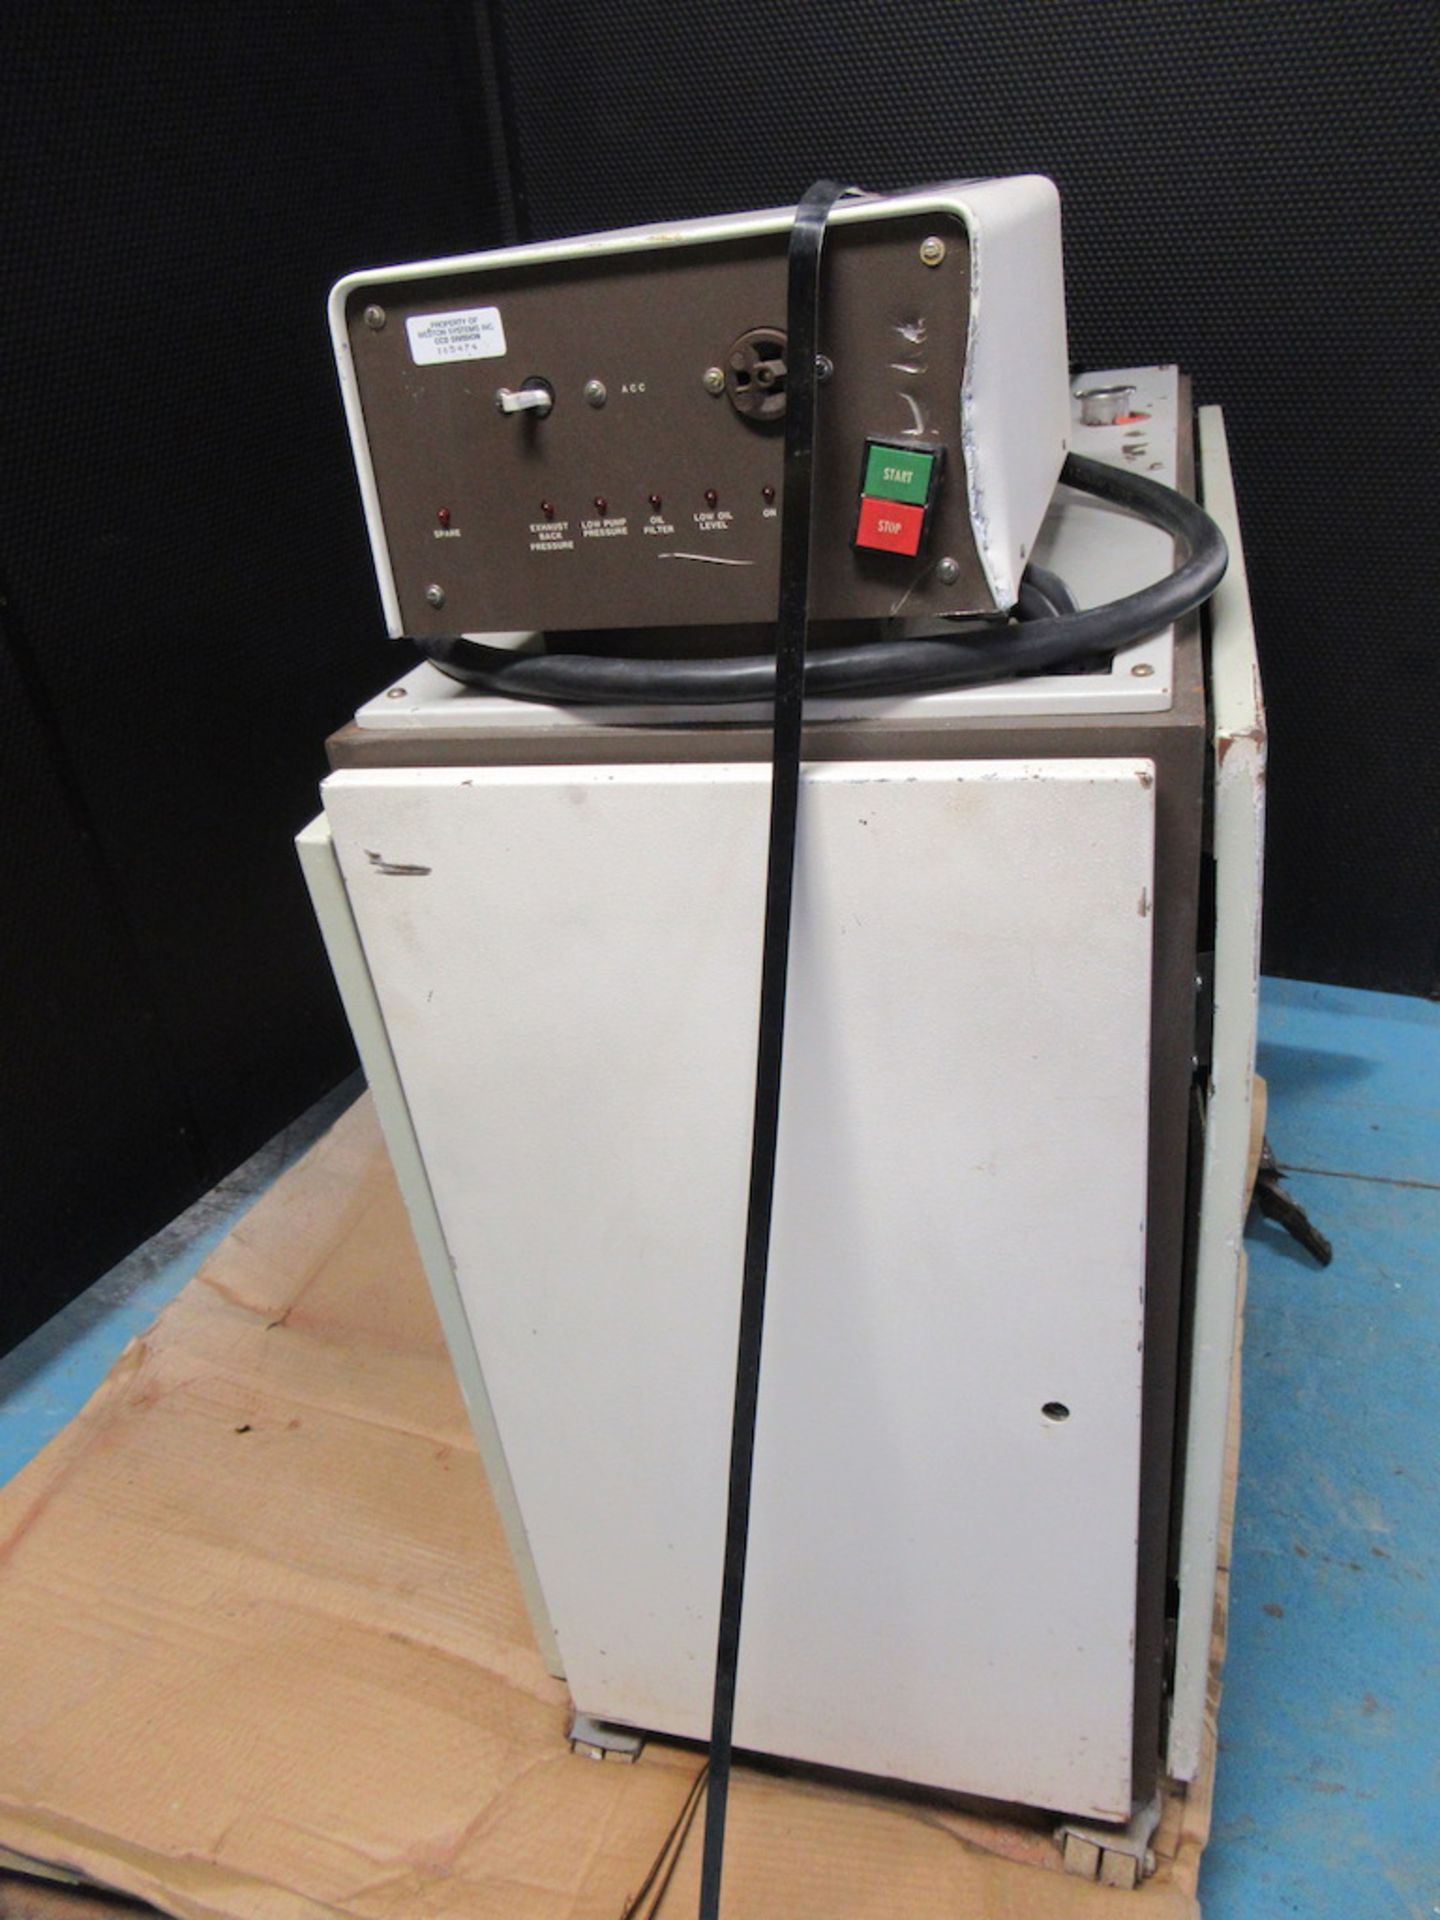 Stokes Vane Pump Anicon System Assembly with Power Block and Pump - Image 13 of 22